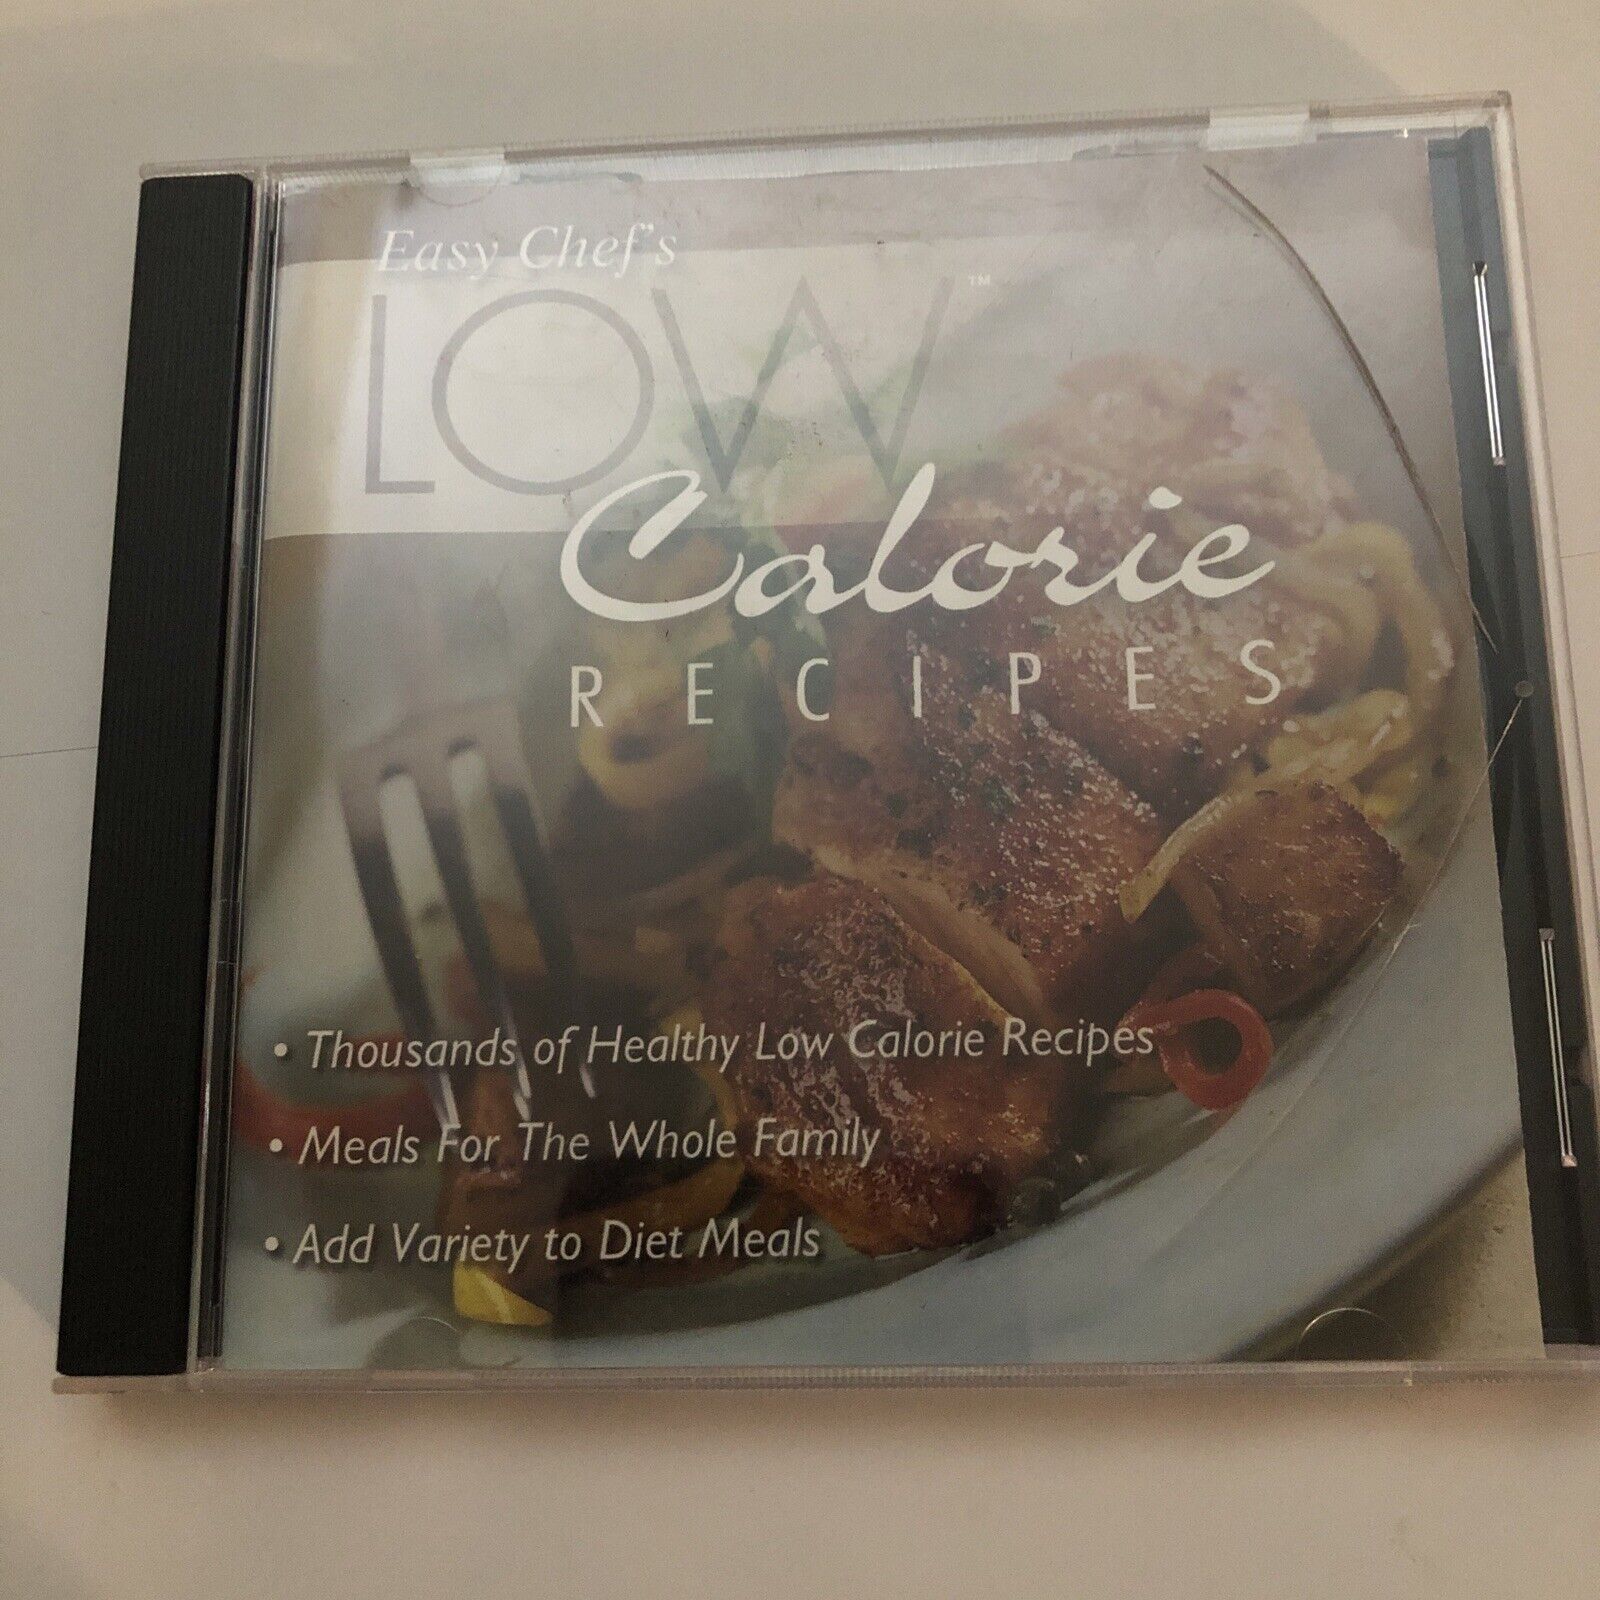 Easy Chef's: Low Calorie Recipes PC CD-ROM for Windows